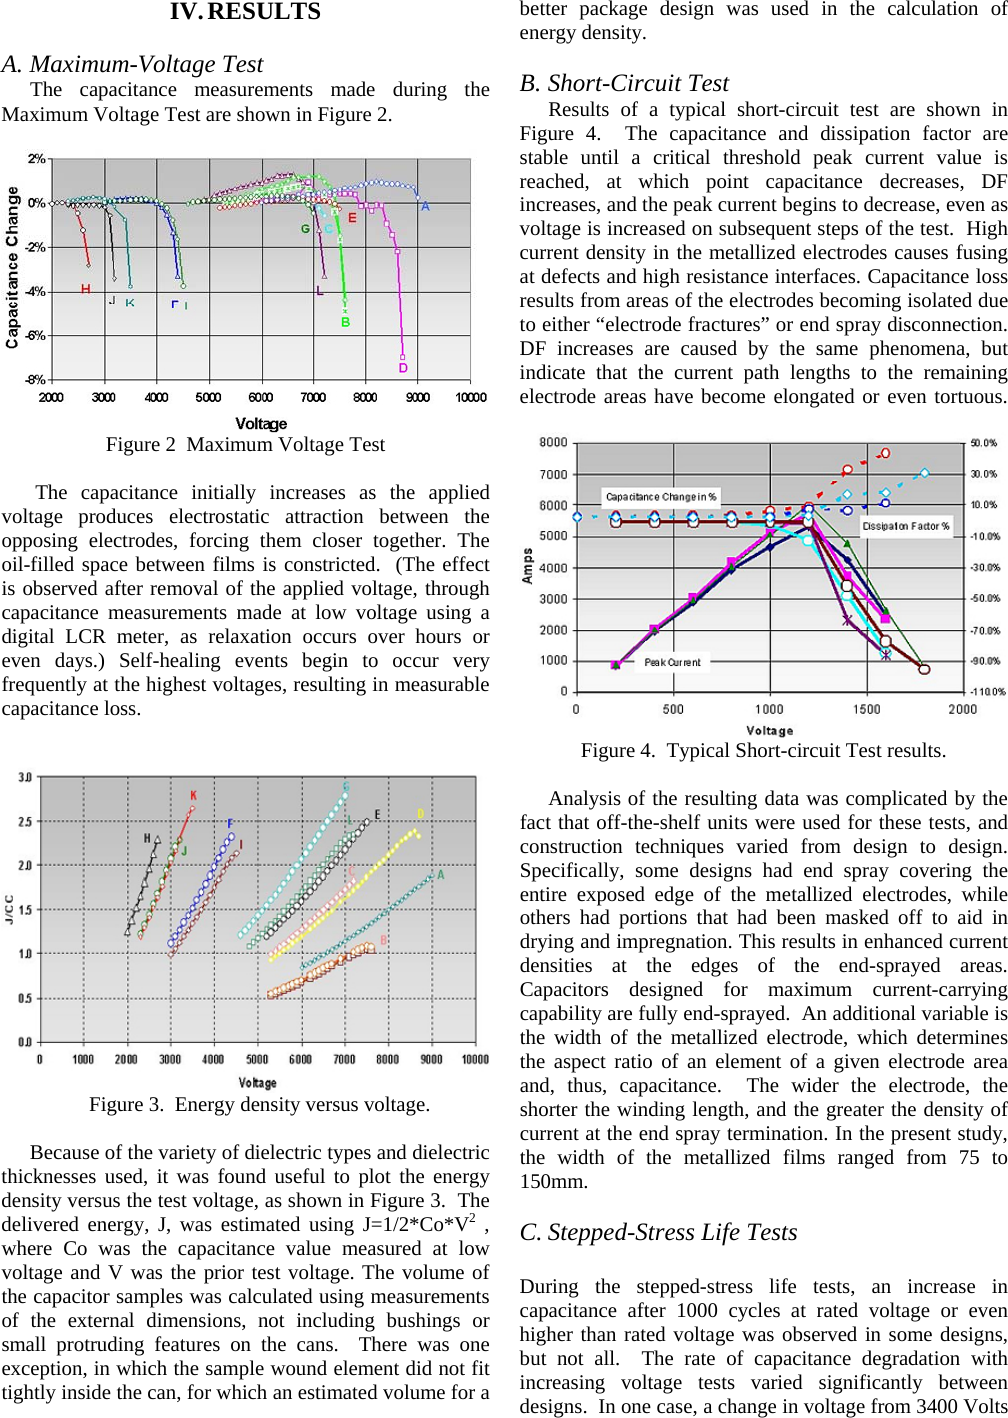 Page 4 of 5 - PREPARATION OF PAPERS FOR THE 2003 IEEE INTERNATIONAL CONFERENCE ON High-energy-capacitor-characterization